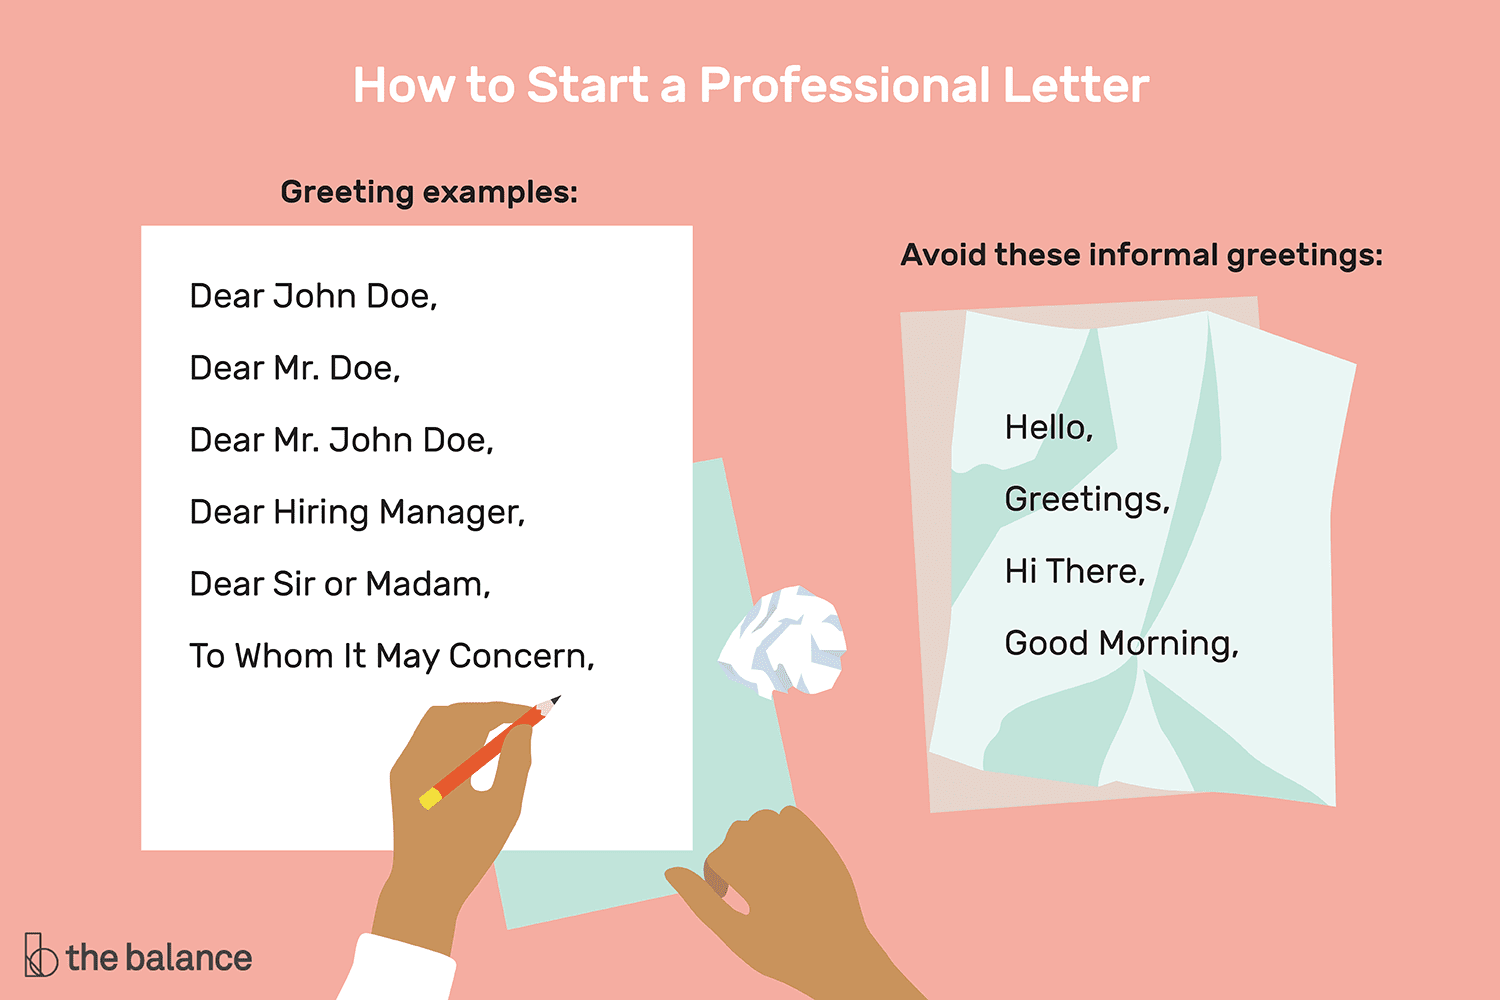 How To Start A Letter With Professional Greeting Examples